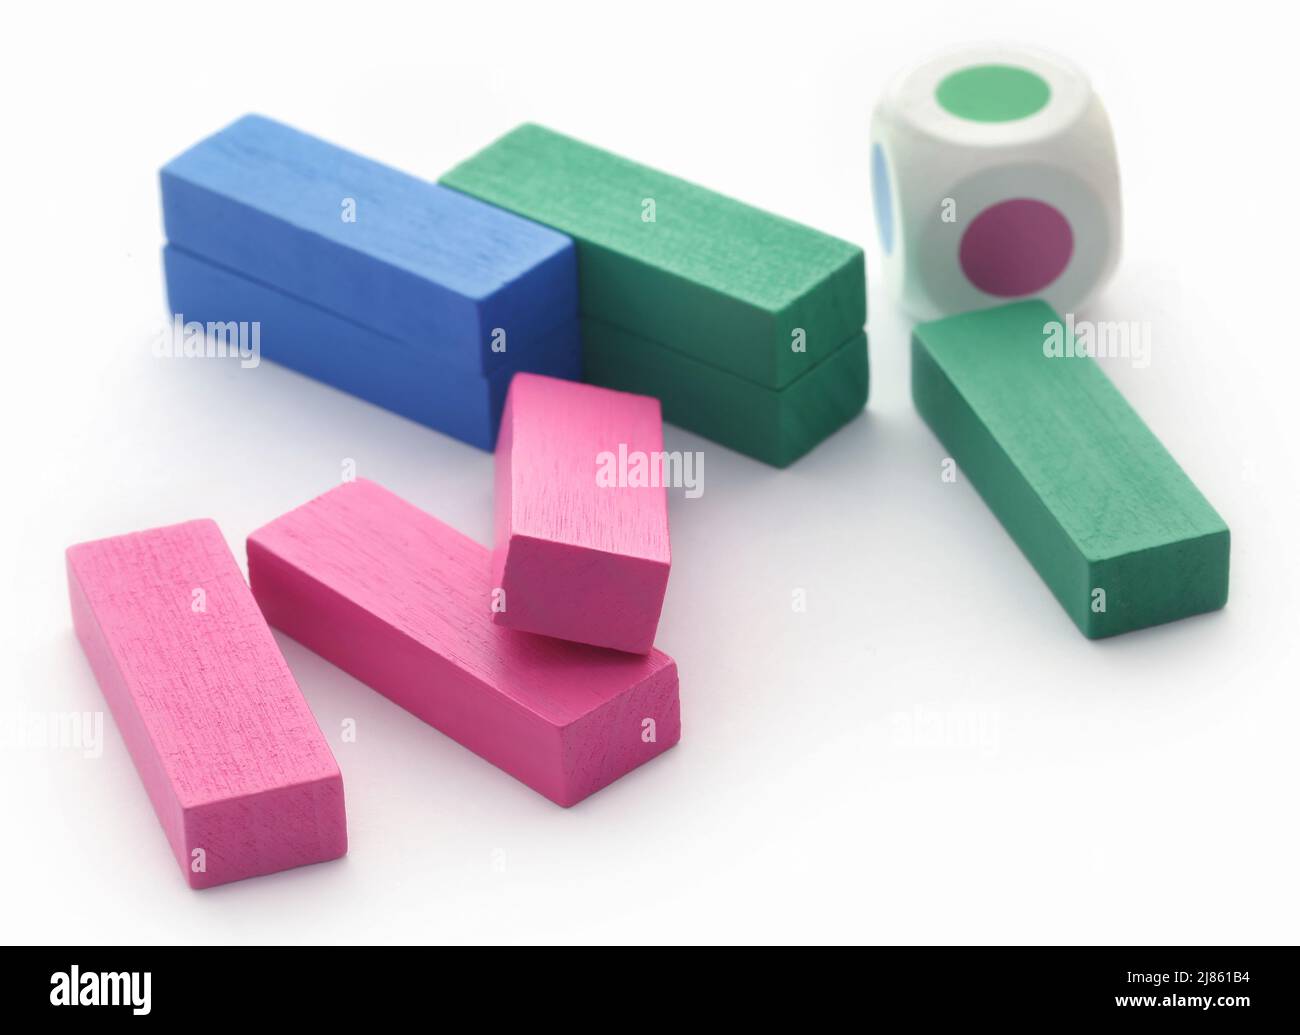 Jenga game of colorful wooden blocks over white background Stock Photo